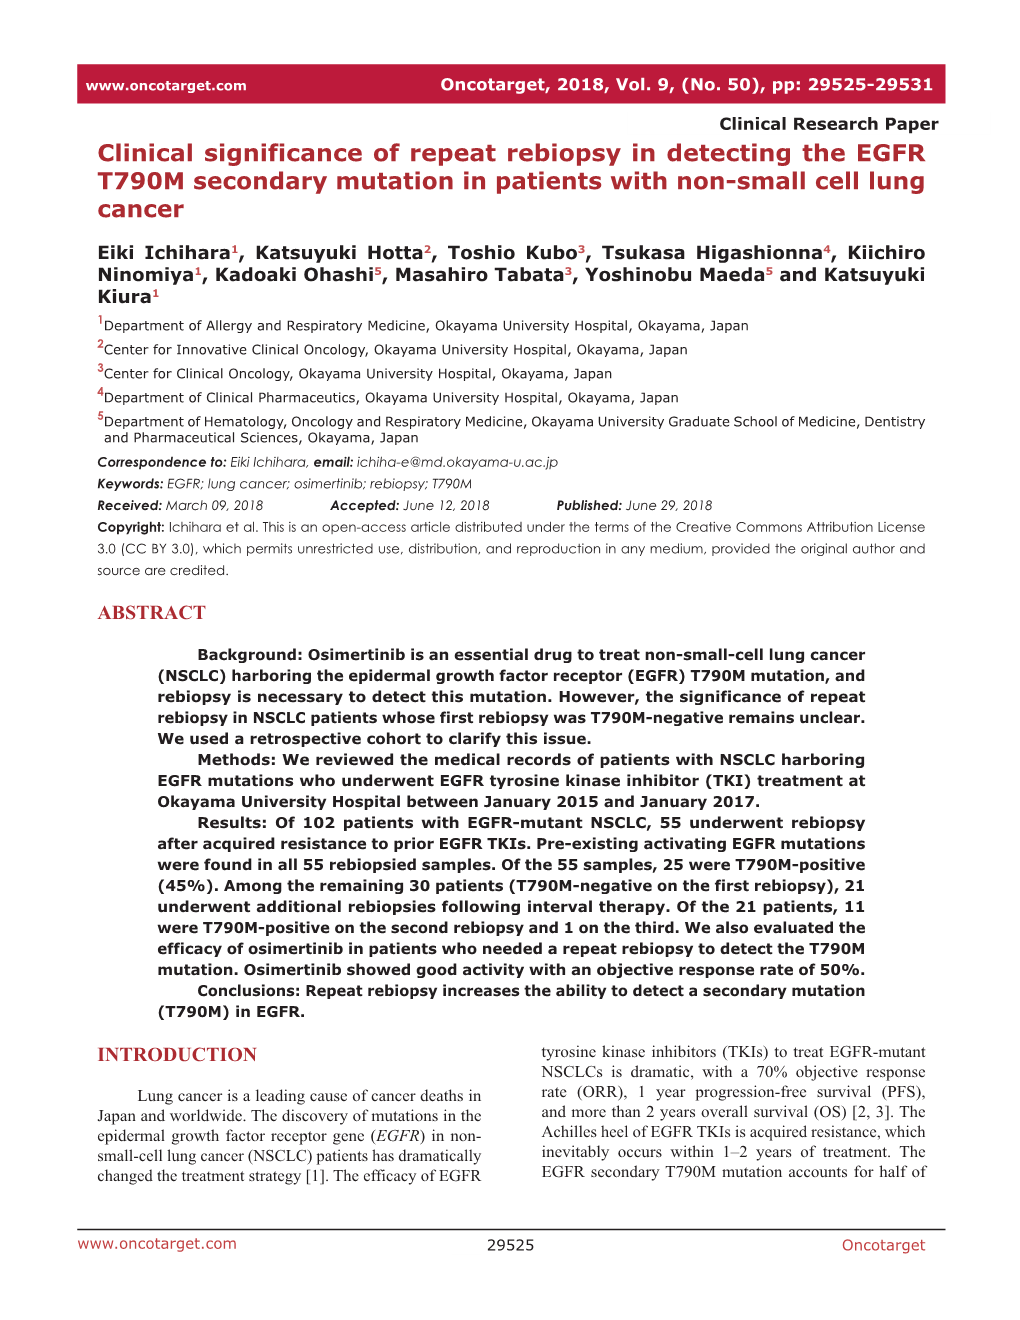 Clinical Significance of Repeat Rebiopsy in Detecting the EGFR T790M Secondary Mutation in Patients with Non-Small Cell Lung Cancer